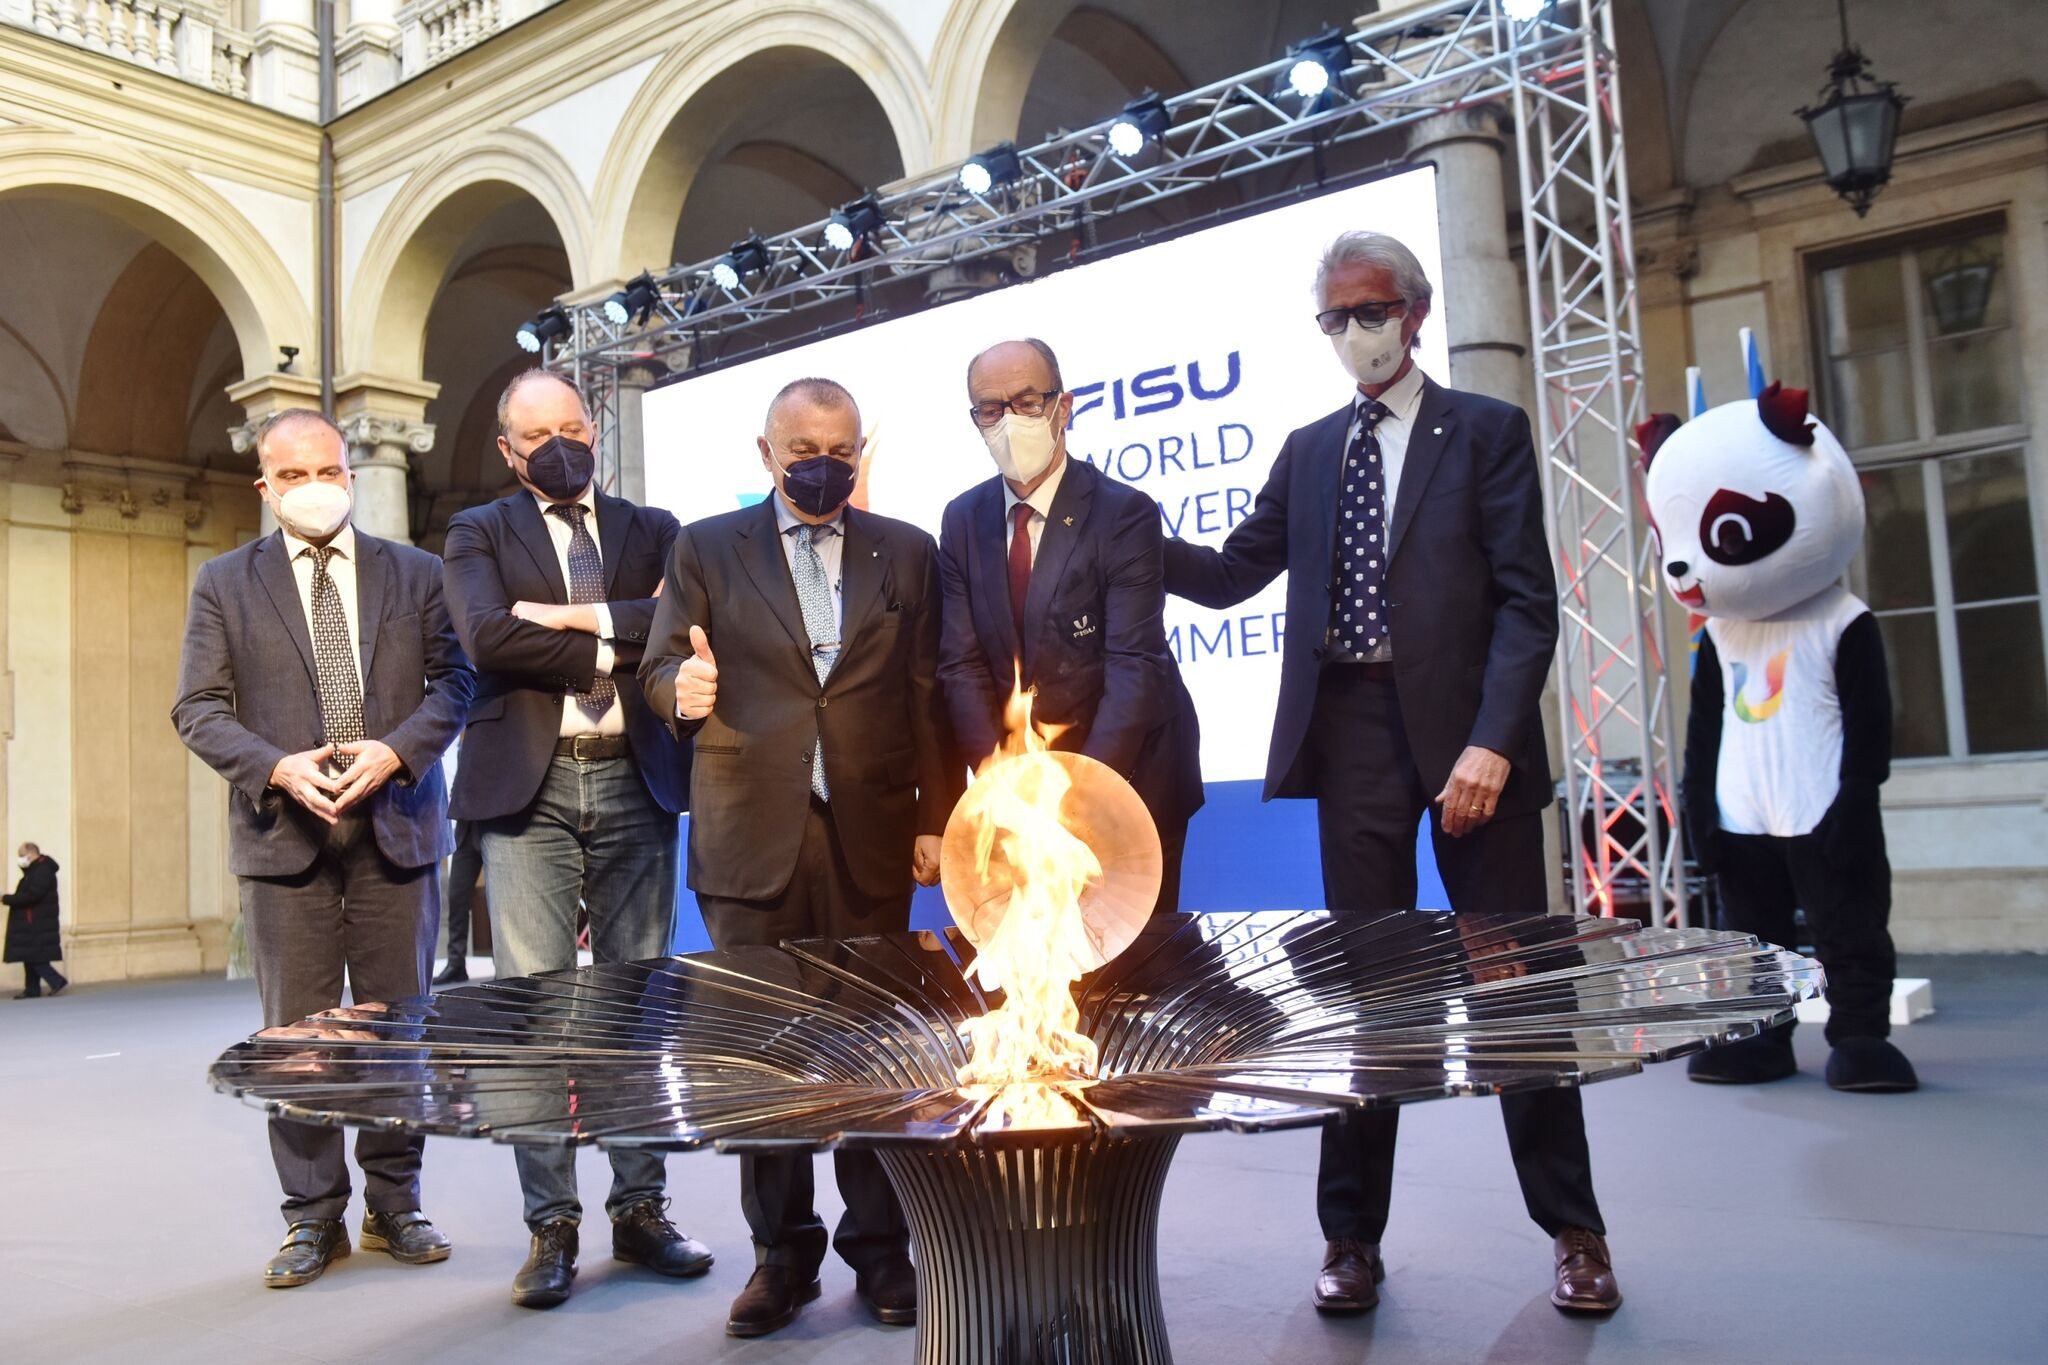 Leonz Eder, second from right, lit the FISU Flame which is now on its way to Chengdu ©FISU